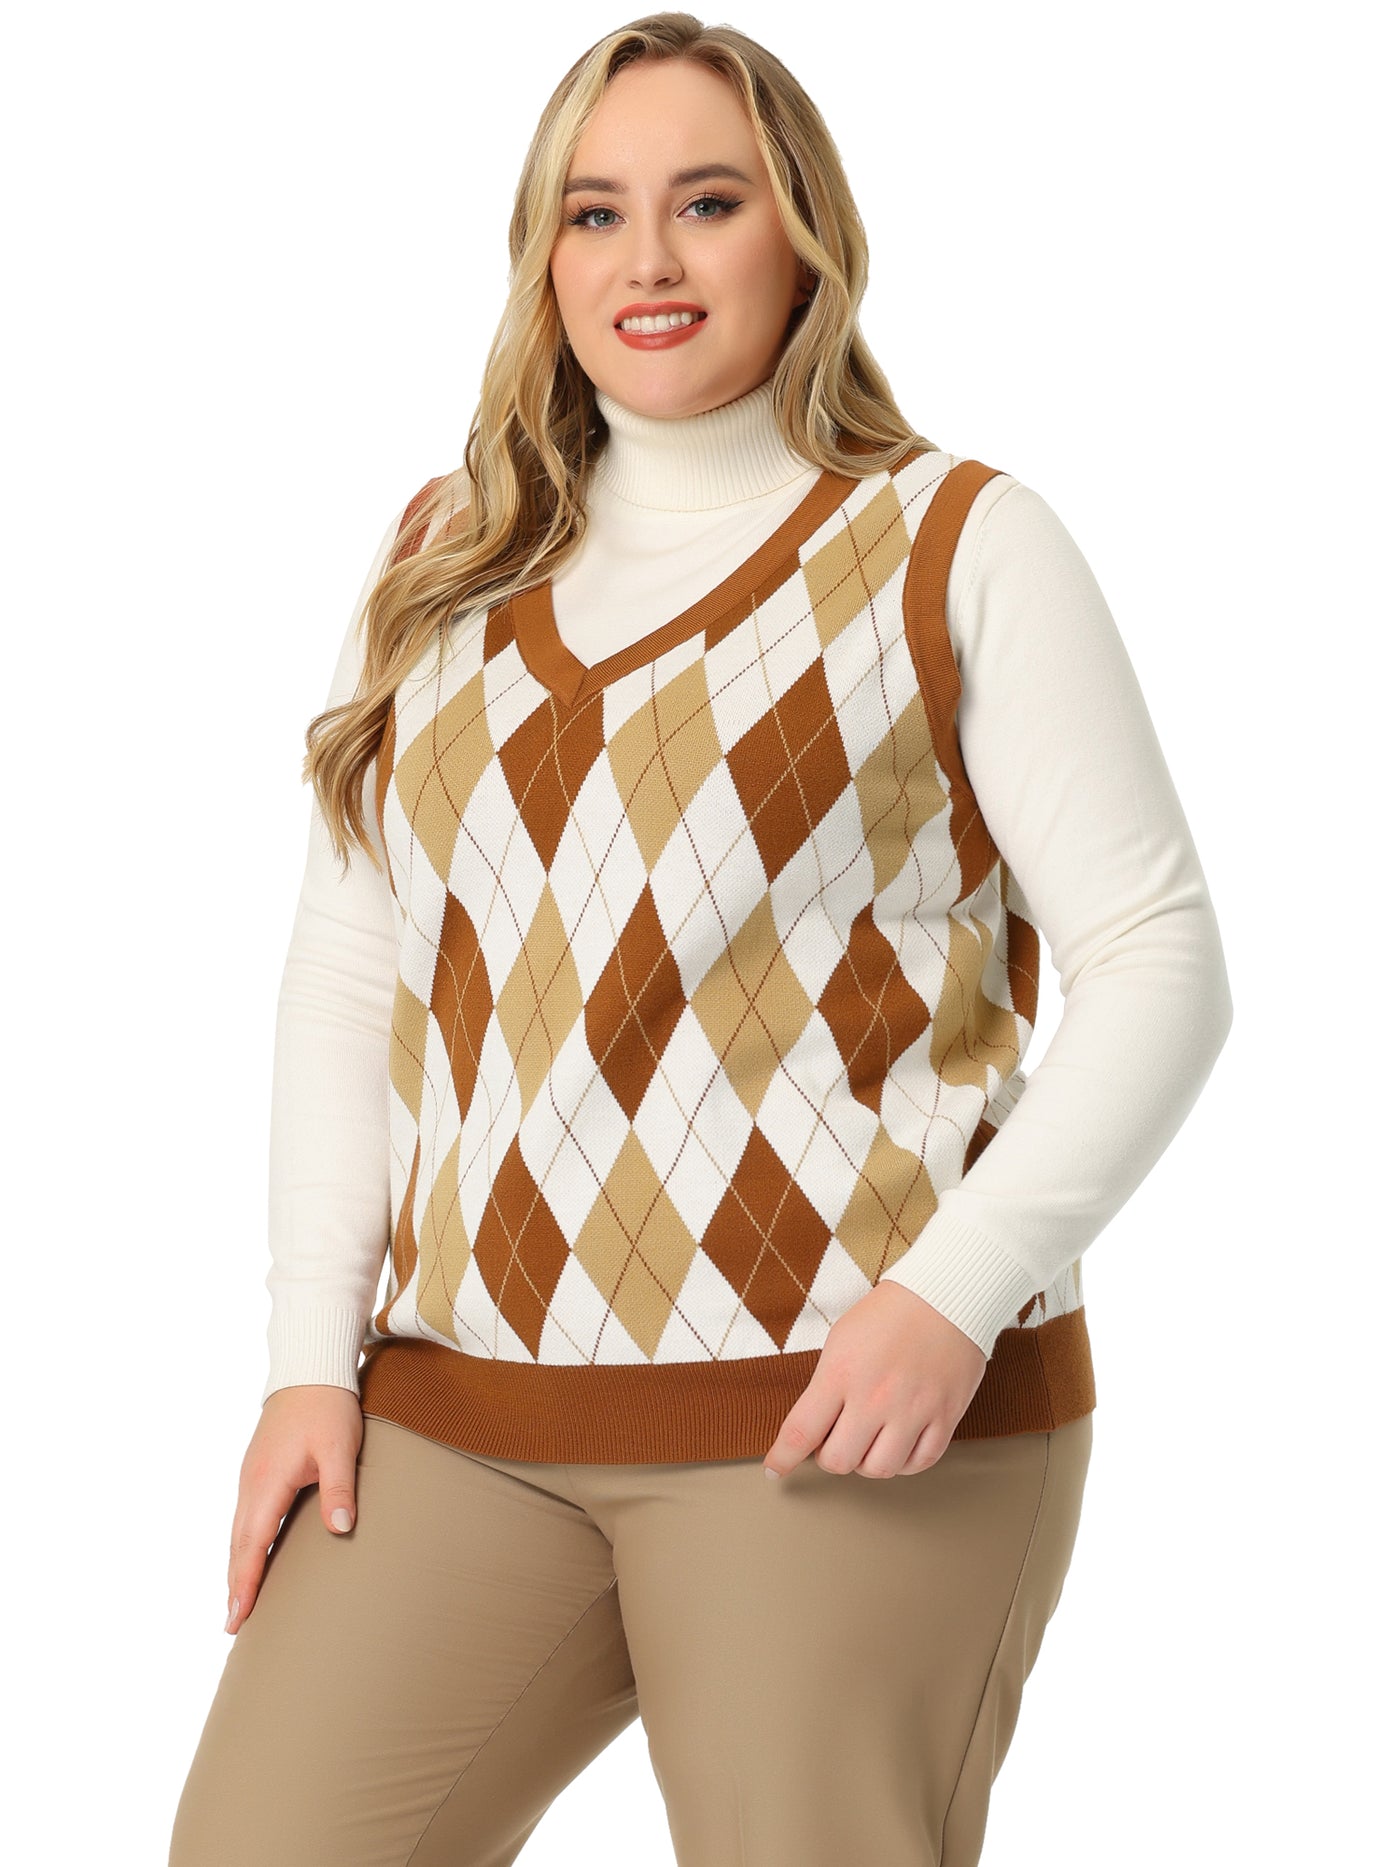 Bublédon Plus Size Vest for Women Cable Knit Sleeveless Pullover Sweater Vests